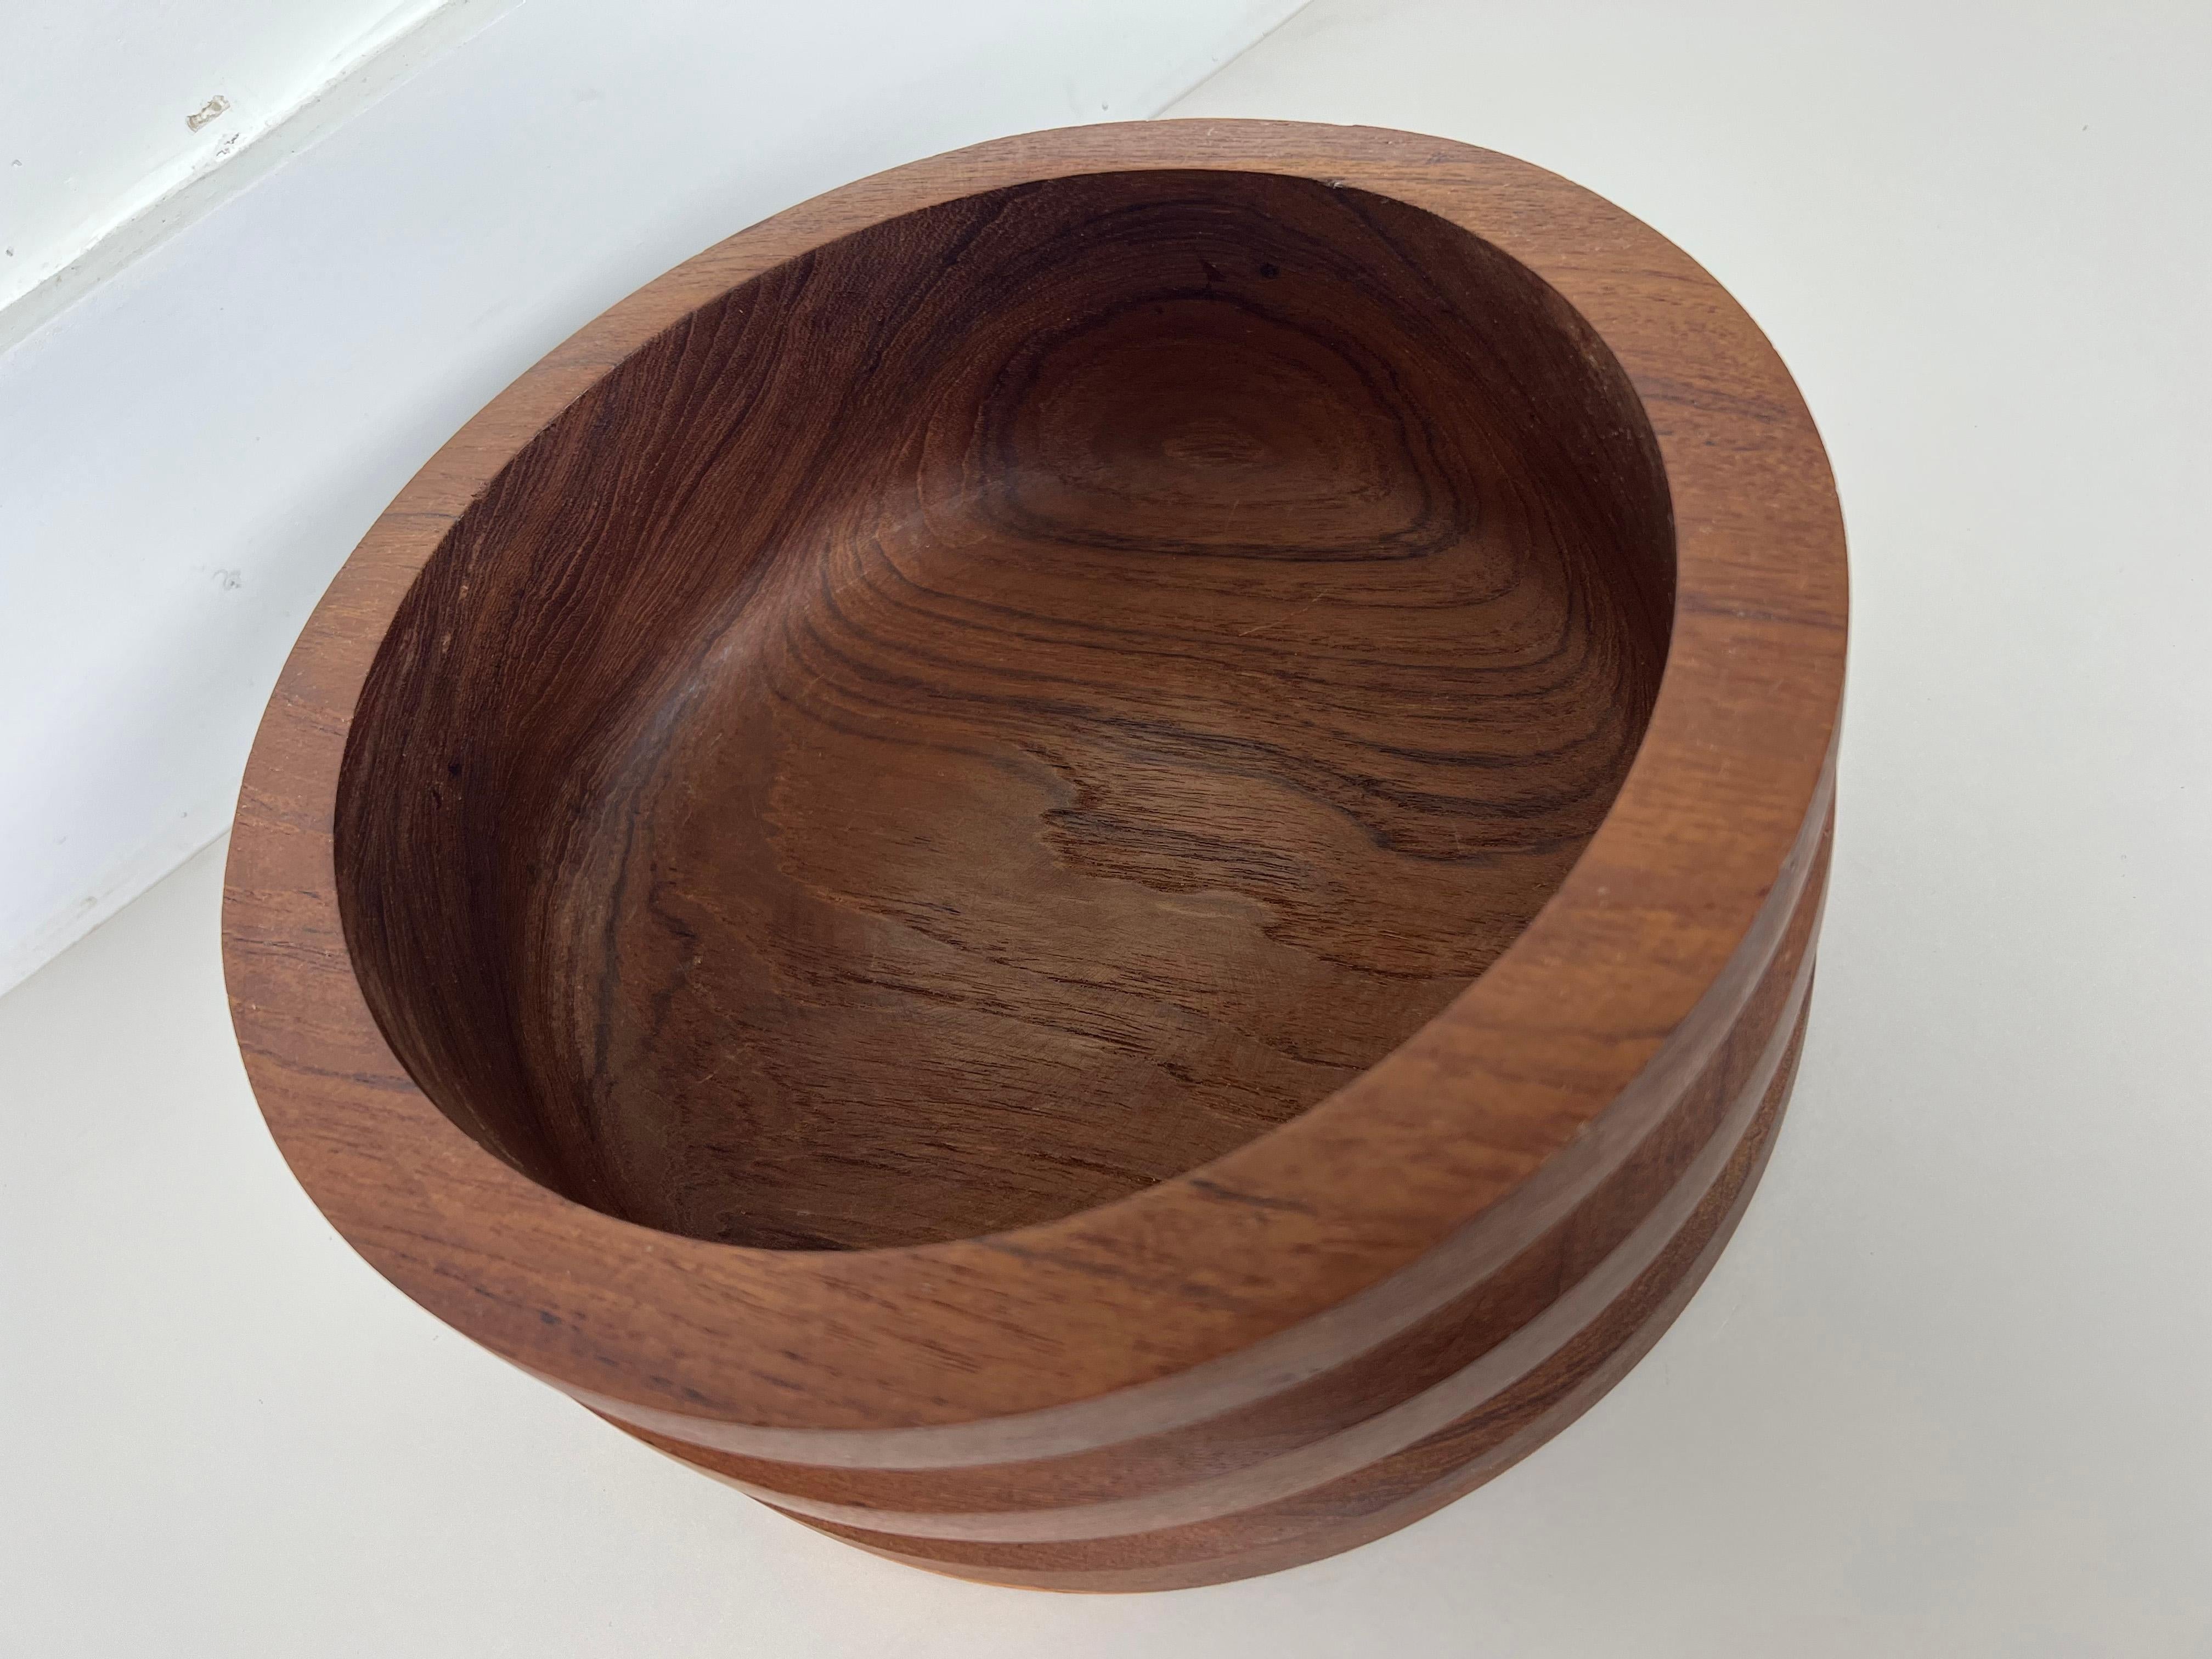 Large vintage Scandinavian bowl with fluted detail crafted in solid teak. Excellent for use as a fruit or salad bowl or simply as a decorative accent piece. 

Origin: Denmark

Year: 1960s

Style: Mid Century Modern / Scandinavian / Danish